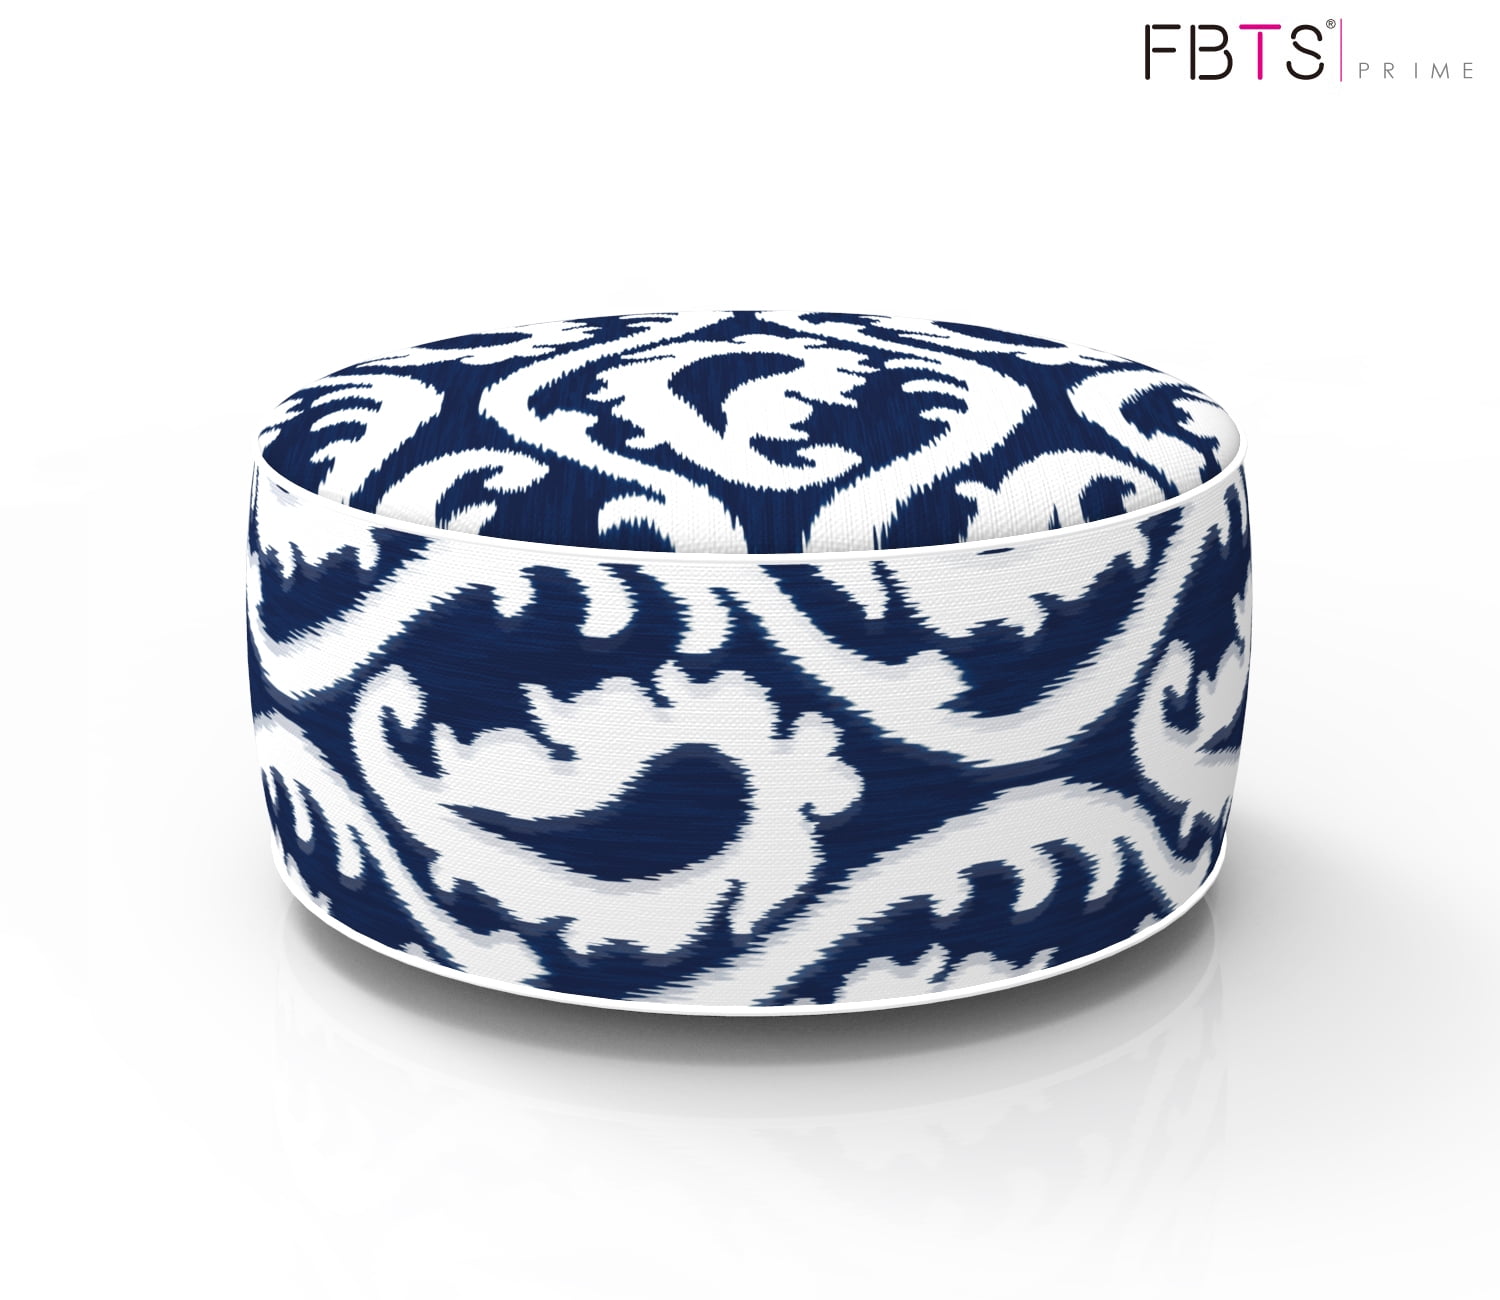 FBTS Prime Outdoor Inflatable Ottoman Navy Round Patio Foot Stools and Ottomans Portable Travel Footstool Used for Outdoor Camping Home Yoga Foot Rest